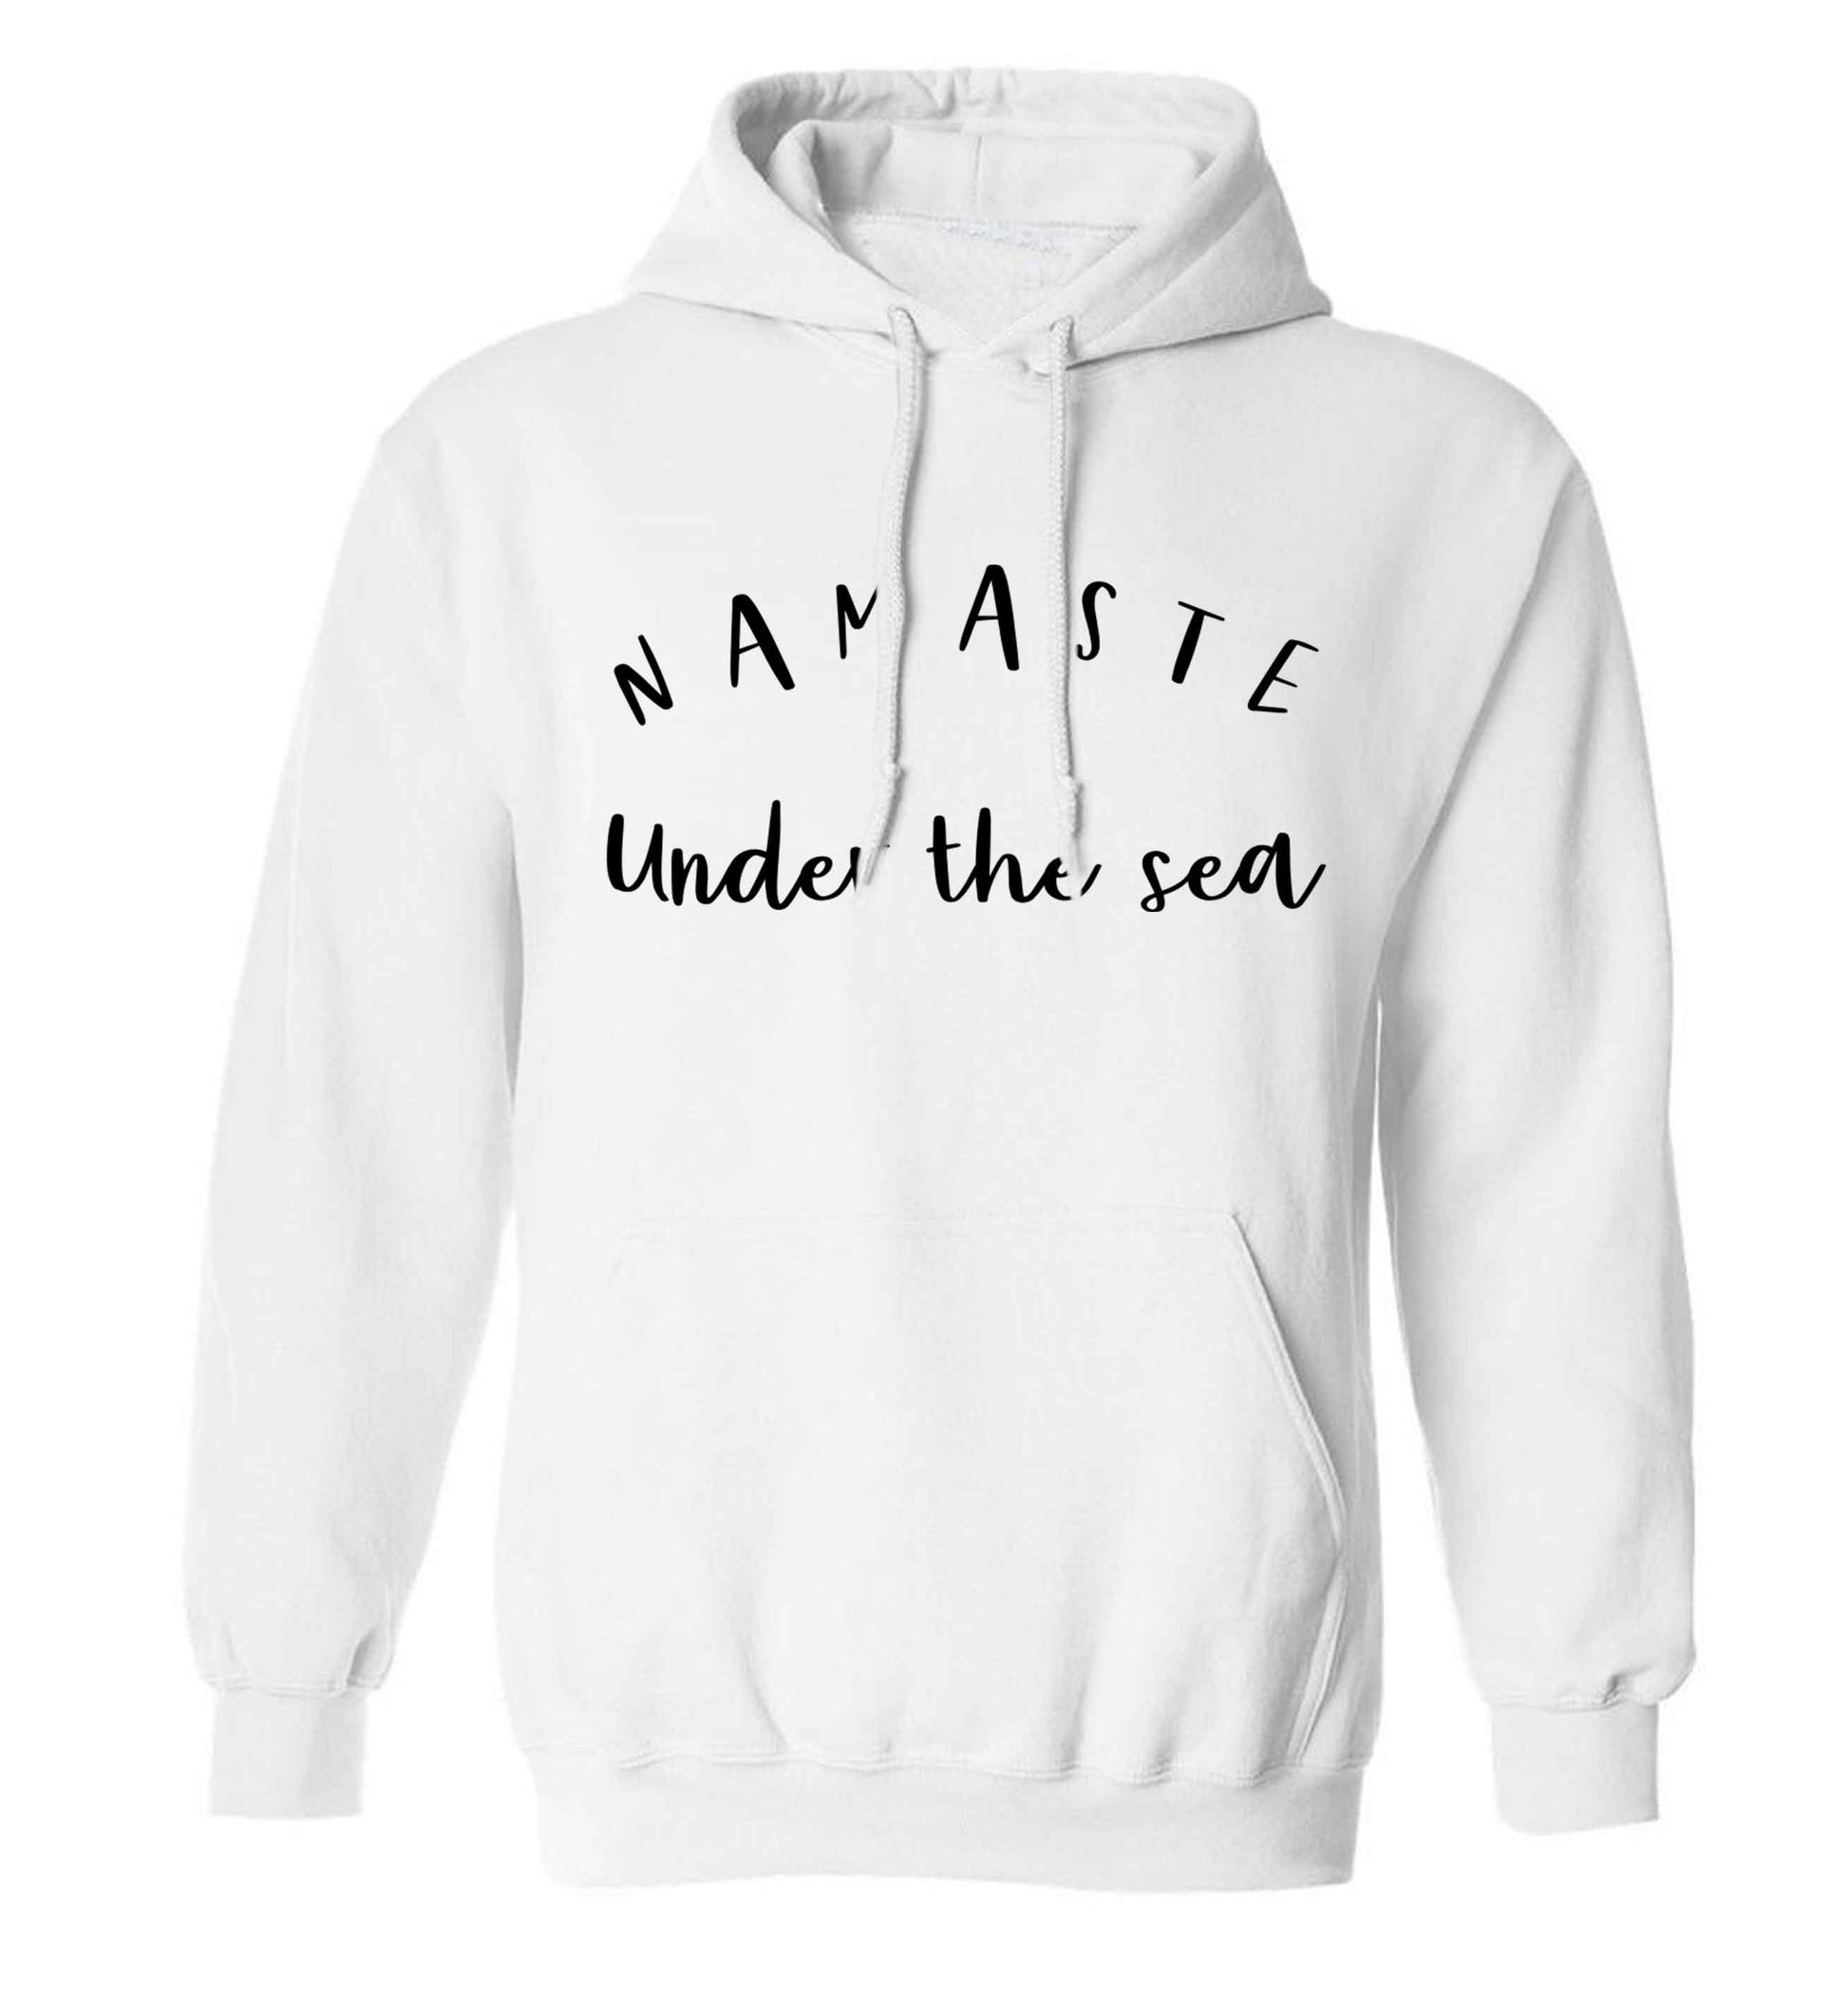 Namaste under the water adults unisex white hoodie 2XL